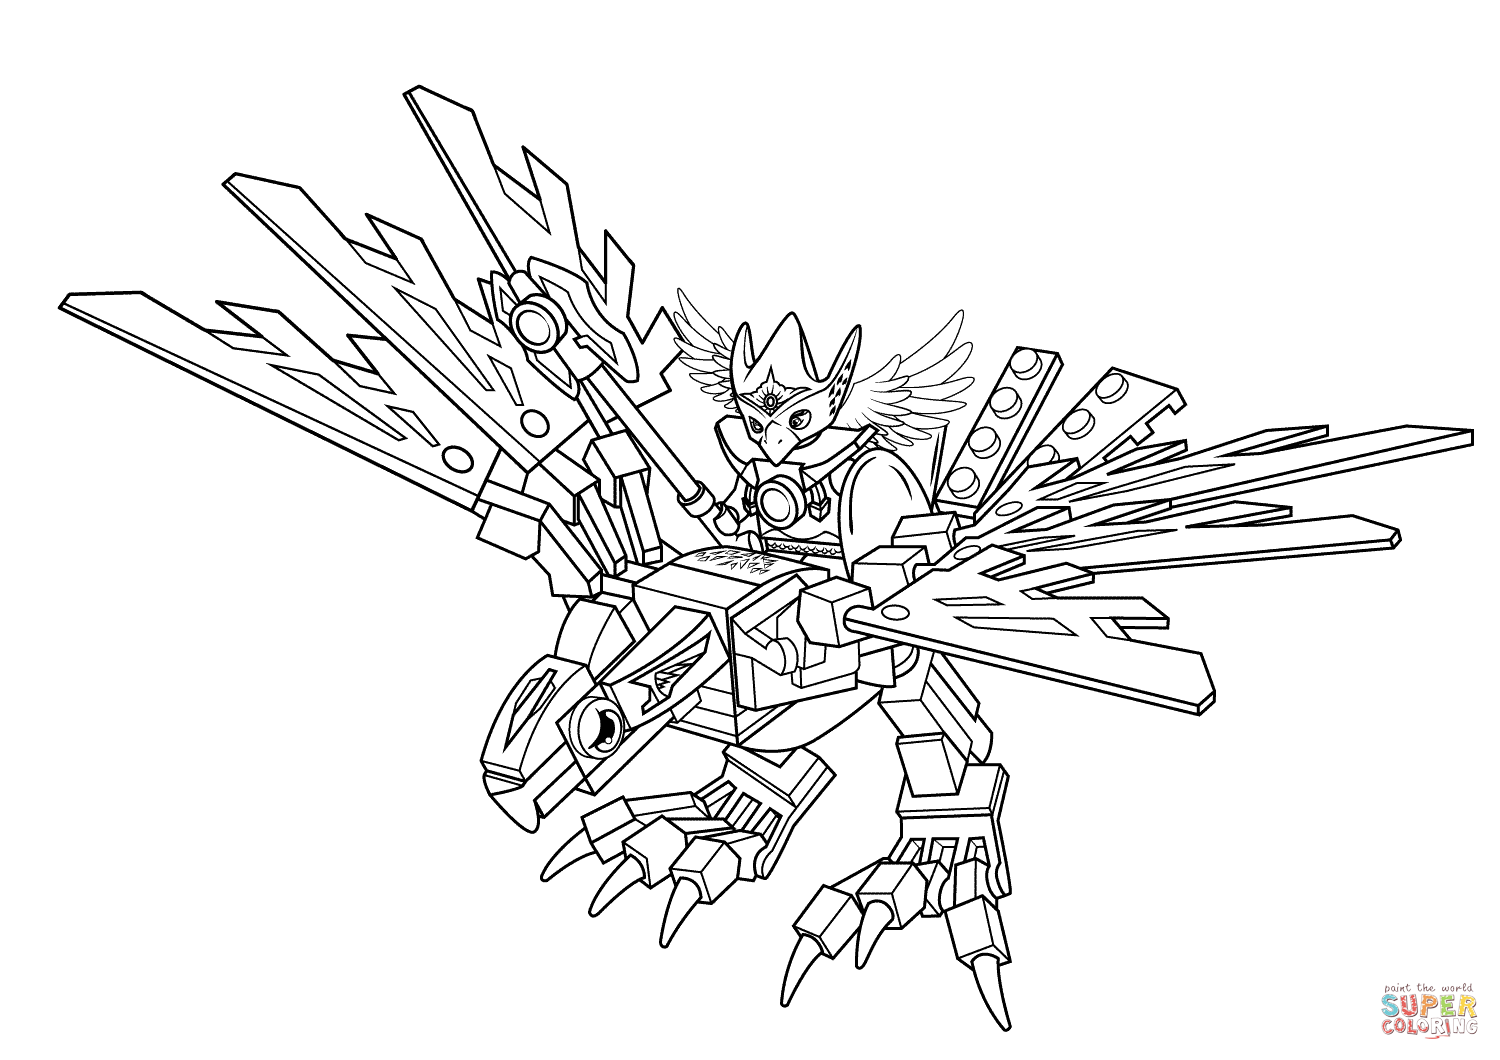 Chima Lego Coloring Pages.